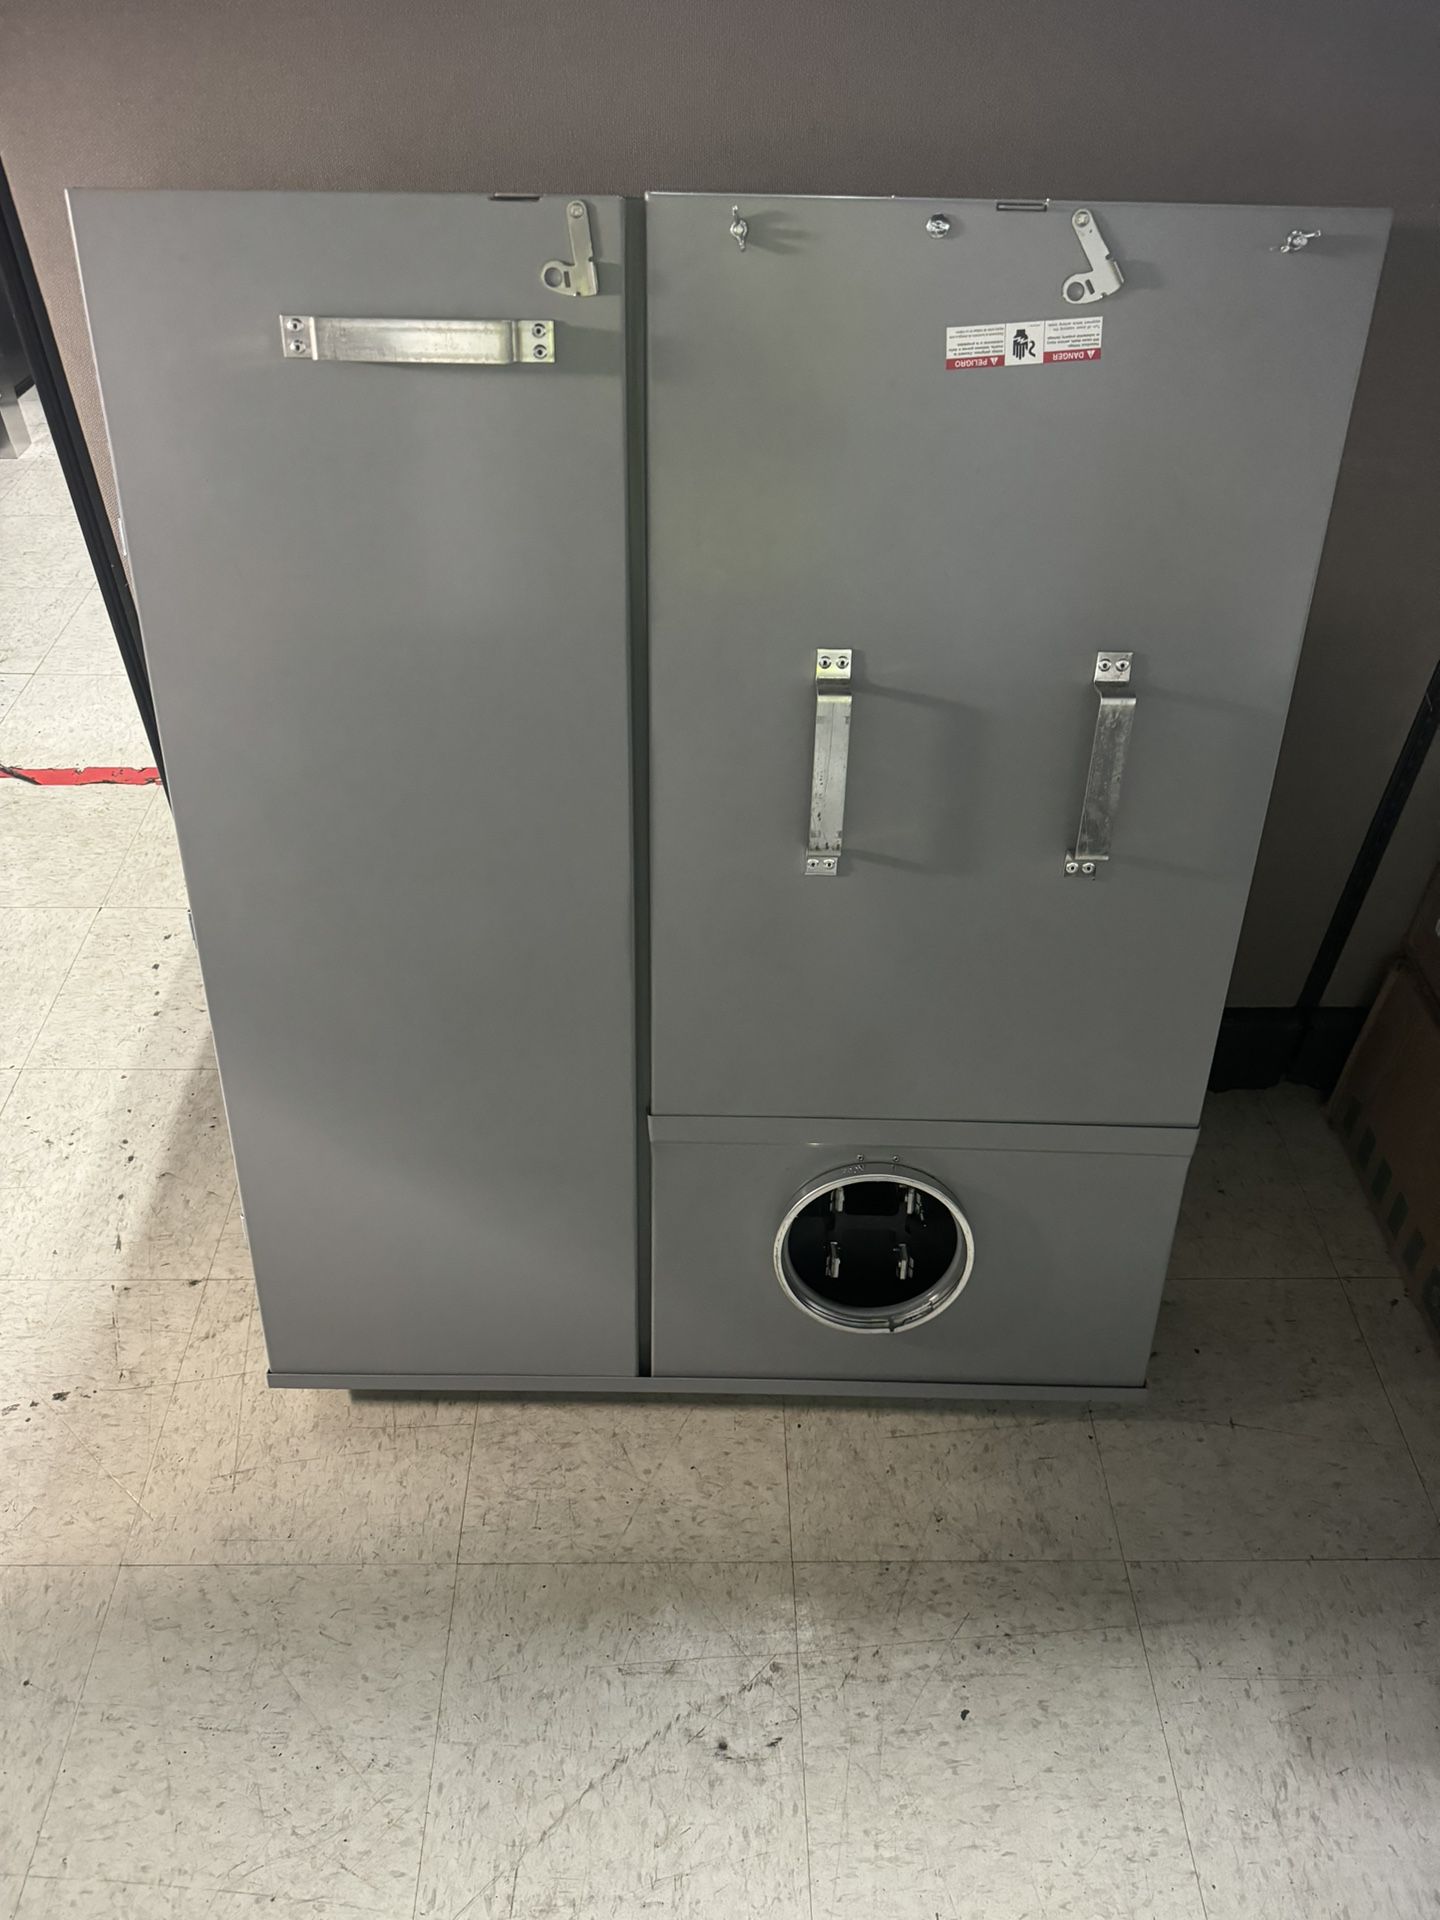 Siemens Meter Loadcenter Combination, 3-Wire, 120/240 VAC, 400 A, 1 ph, Bottom Feed, 4 Jaws